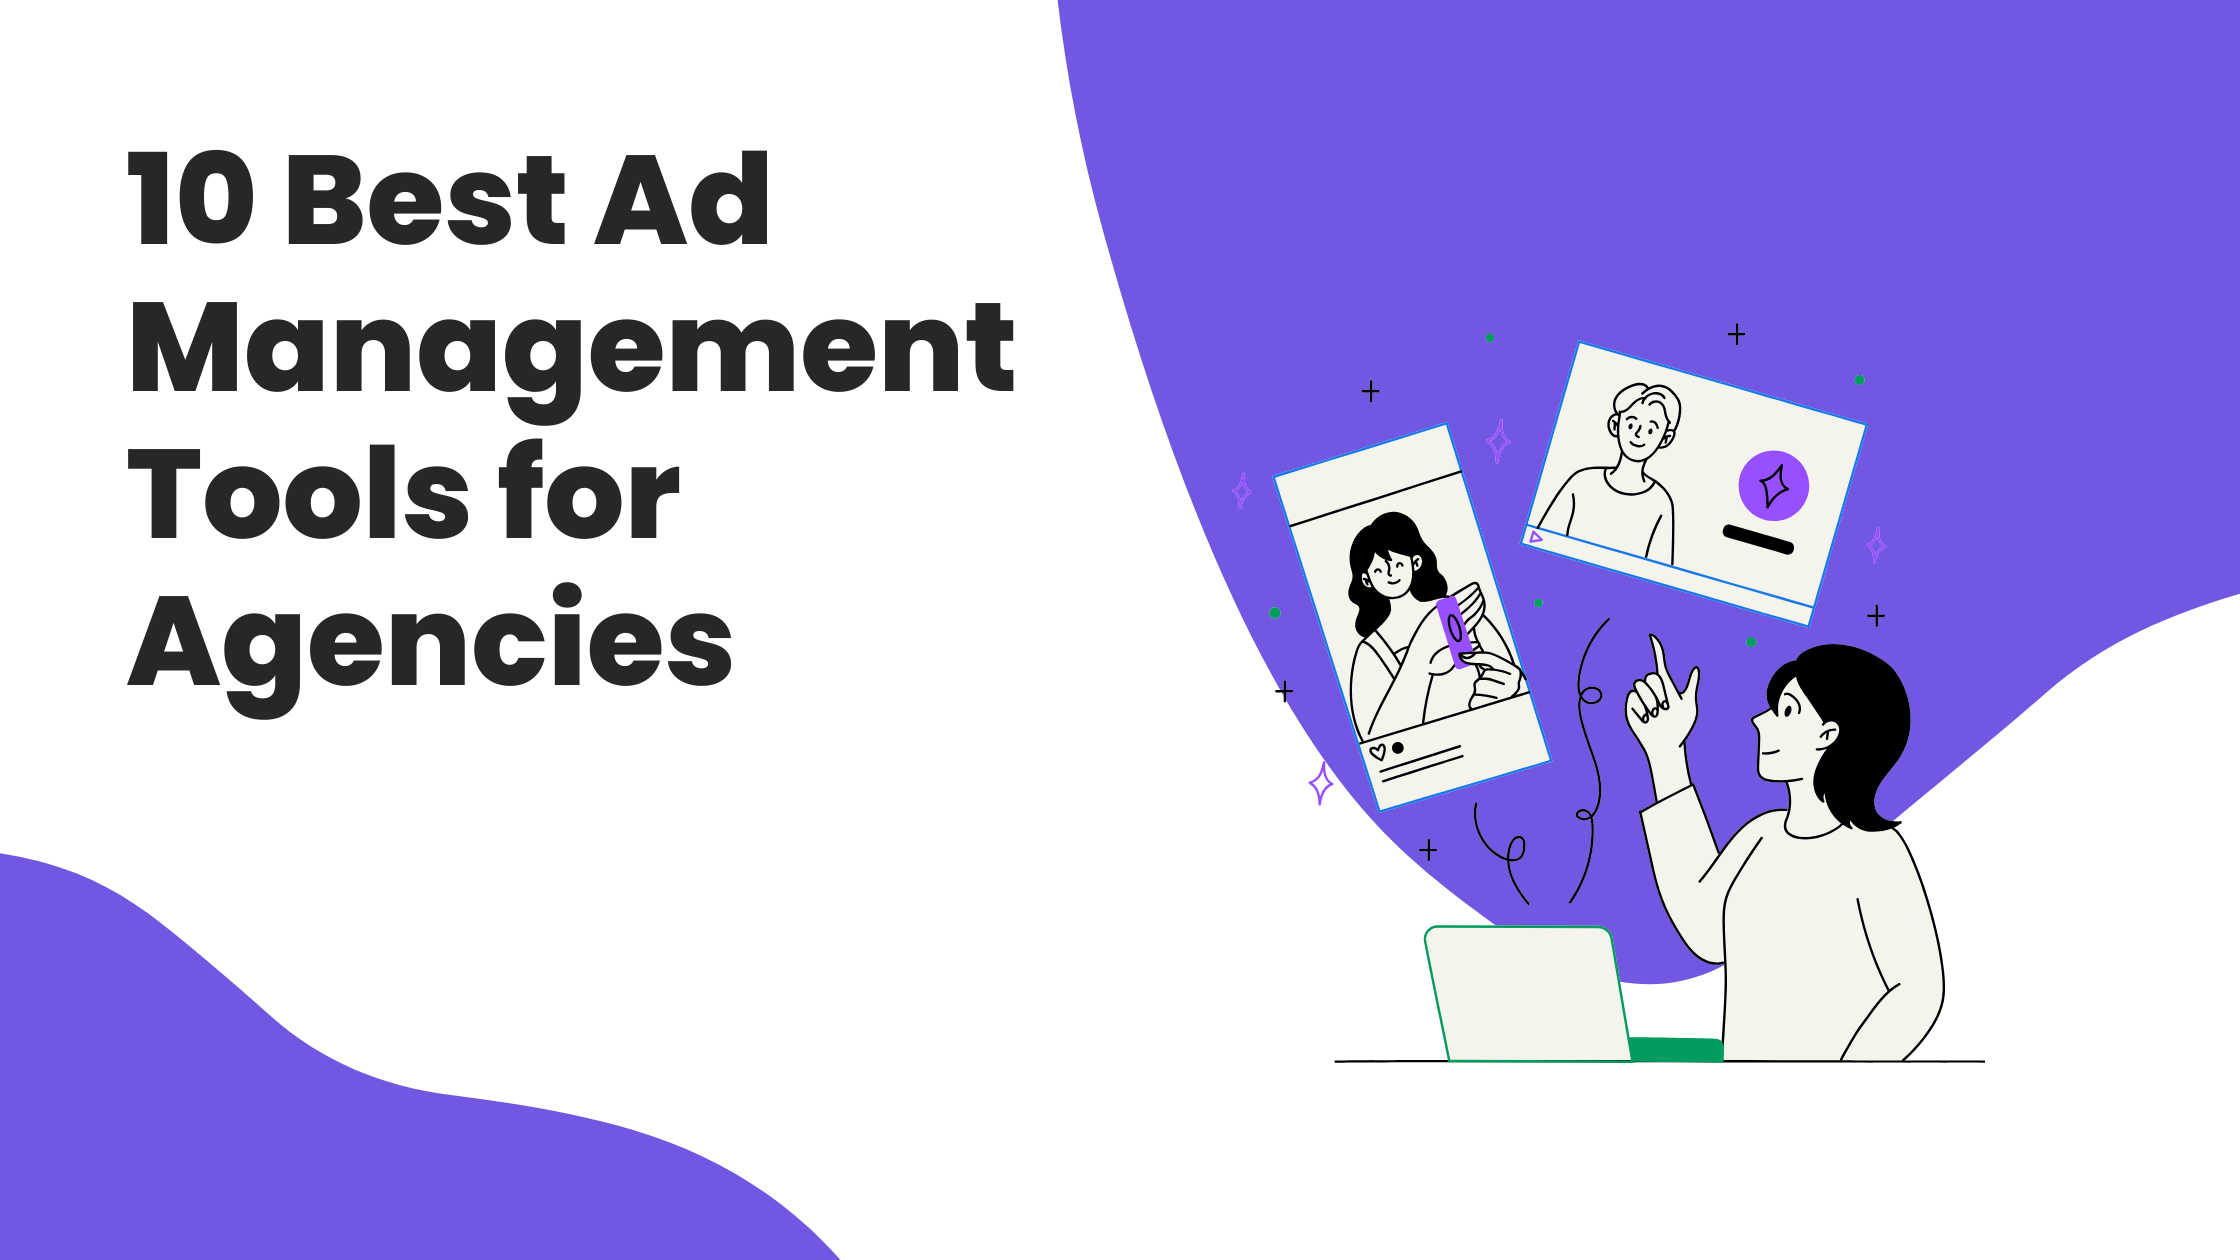 10 Best Ad Management Tools for Agencies